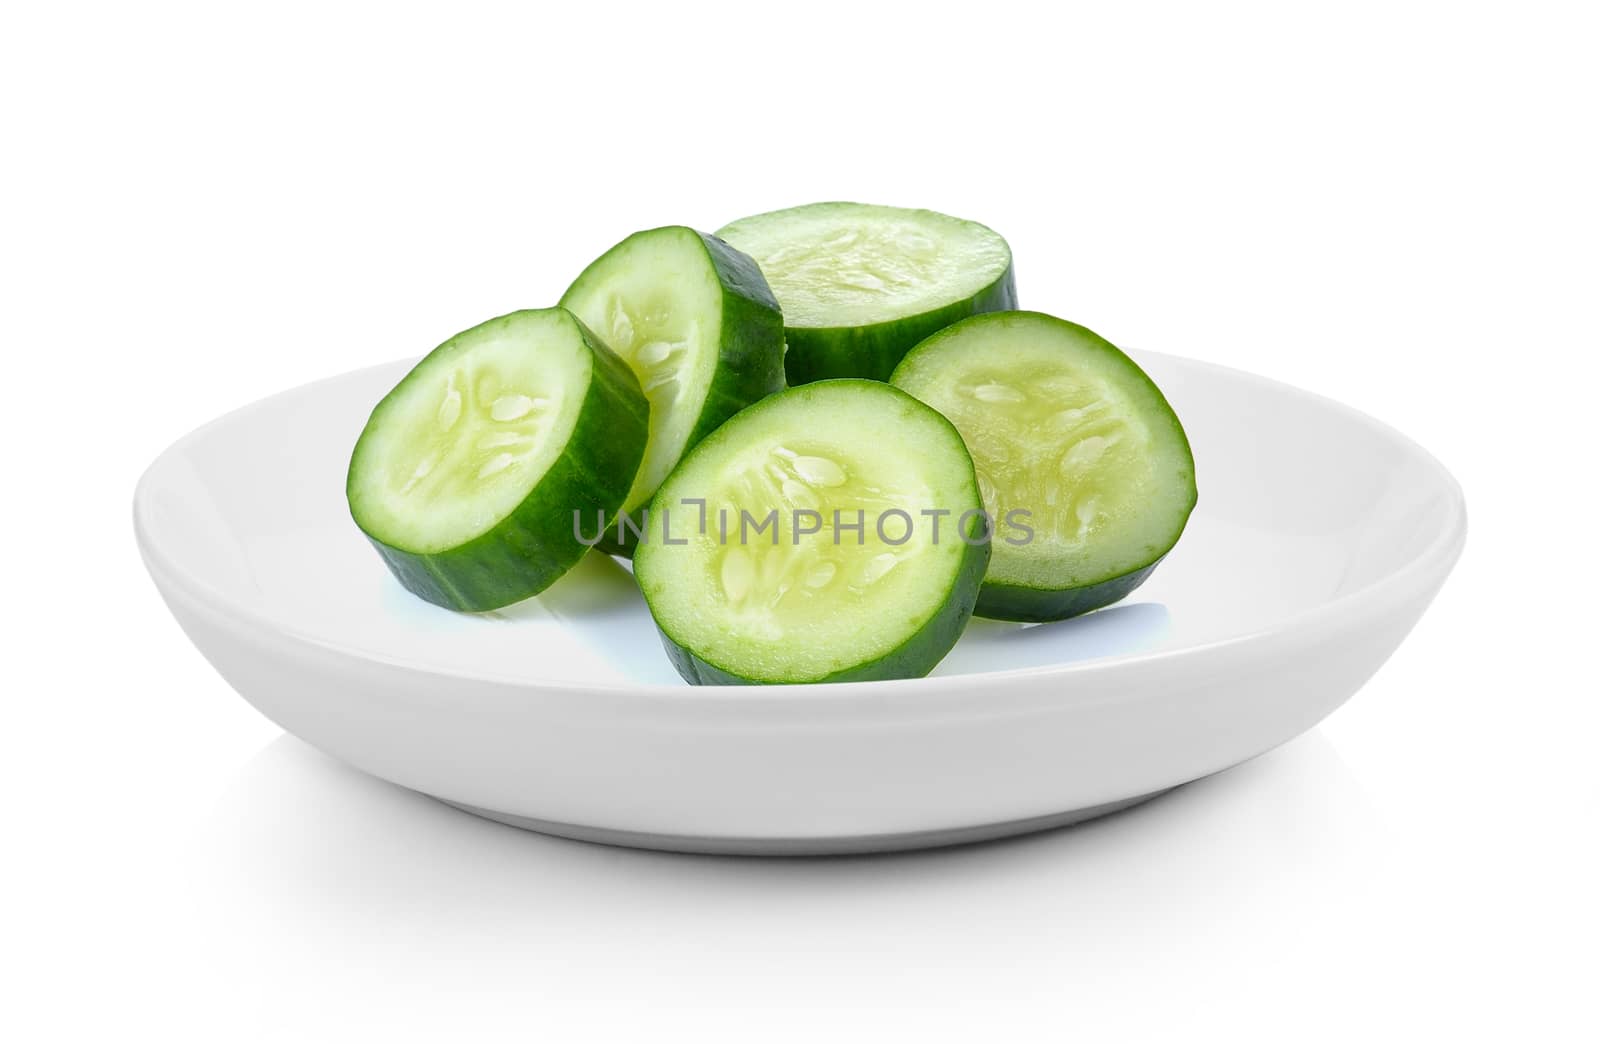 Cucumber slices in plate on white background by sommai